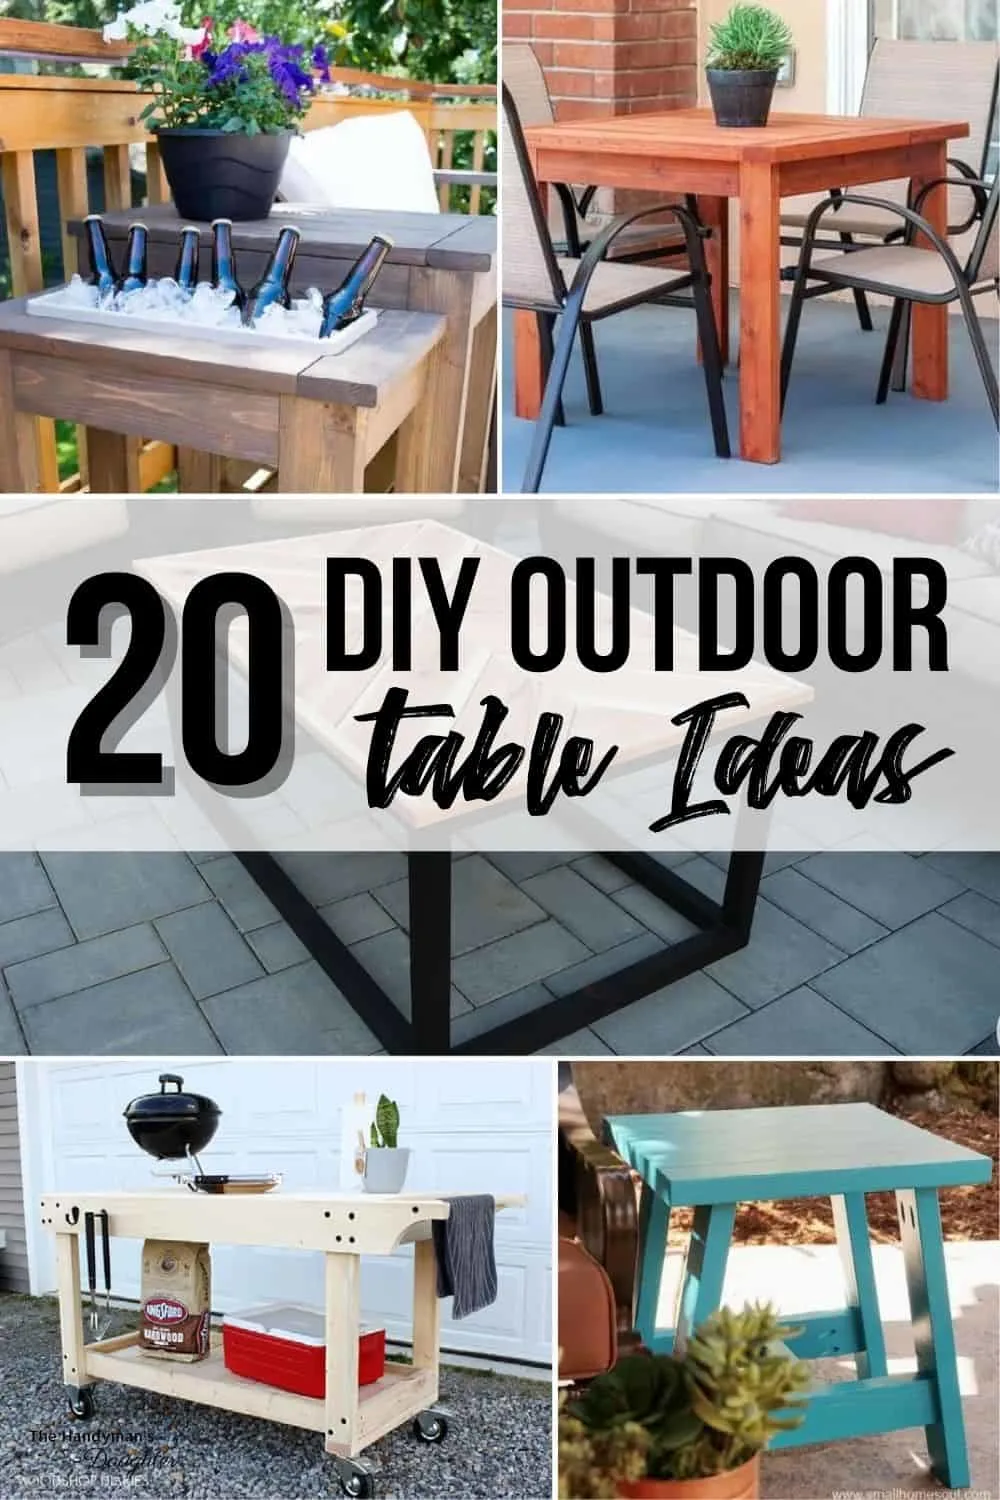 18 DIY Outdoor Table Ideas for Your Deck or Patio   The Handyman's ...